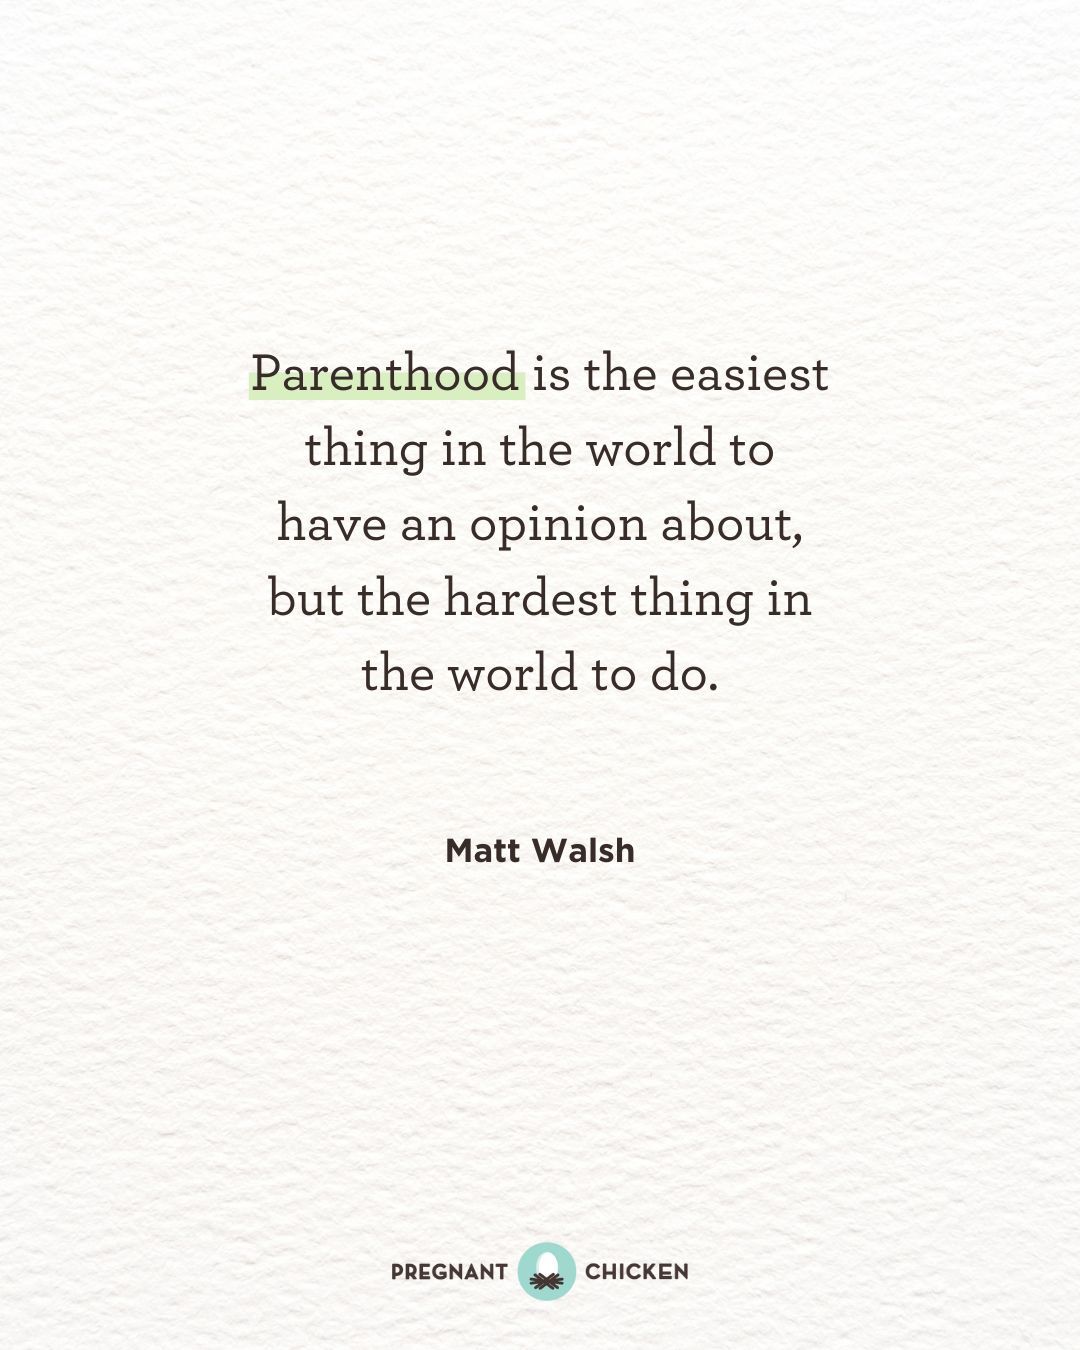 Parenthood is the easiest thing in the world to have an opinion about, but the hardest thing in the world to do.